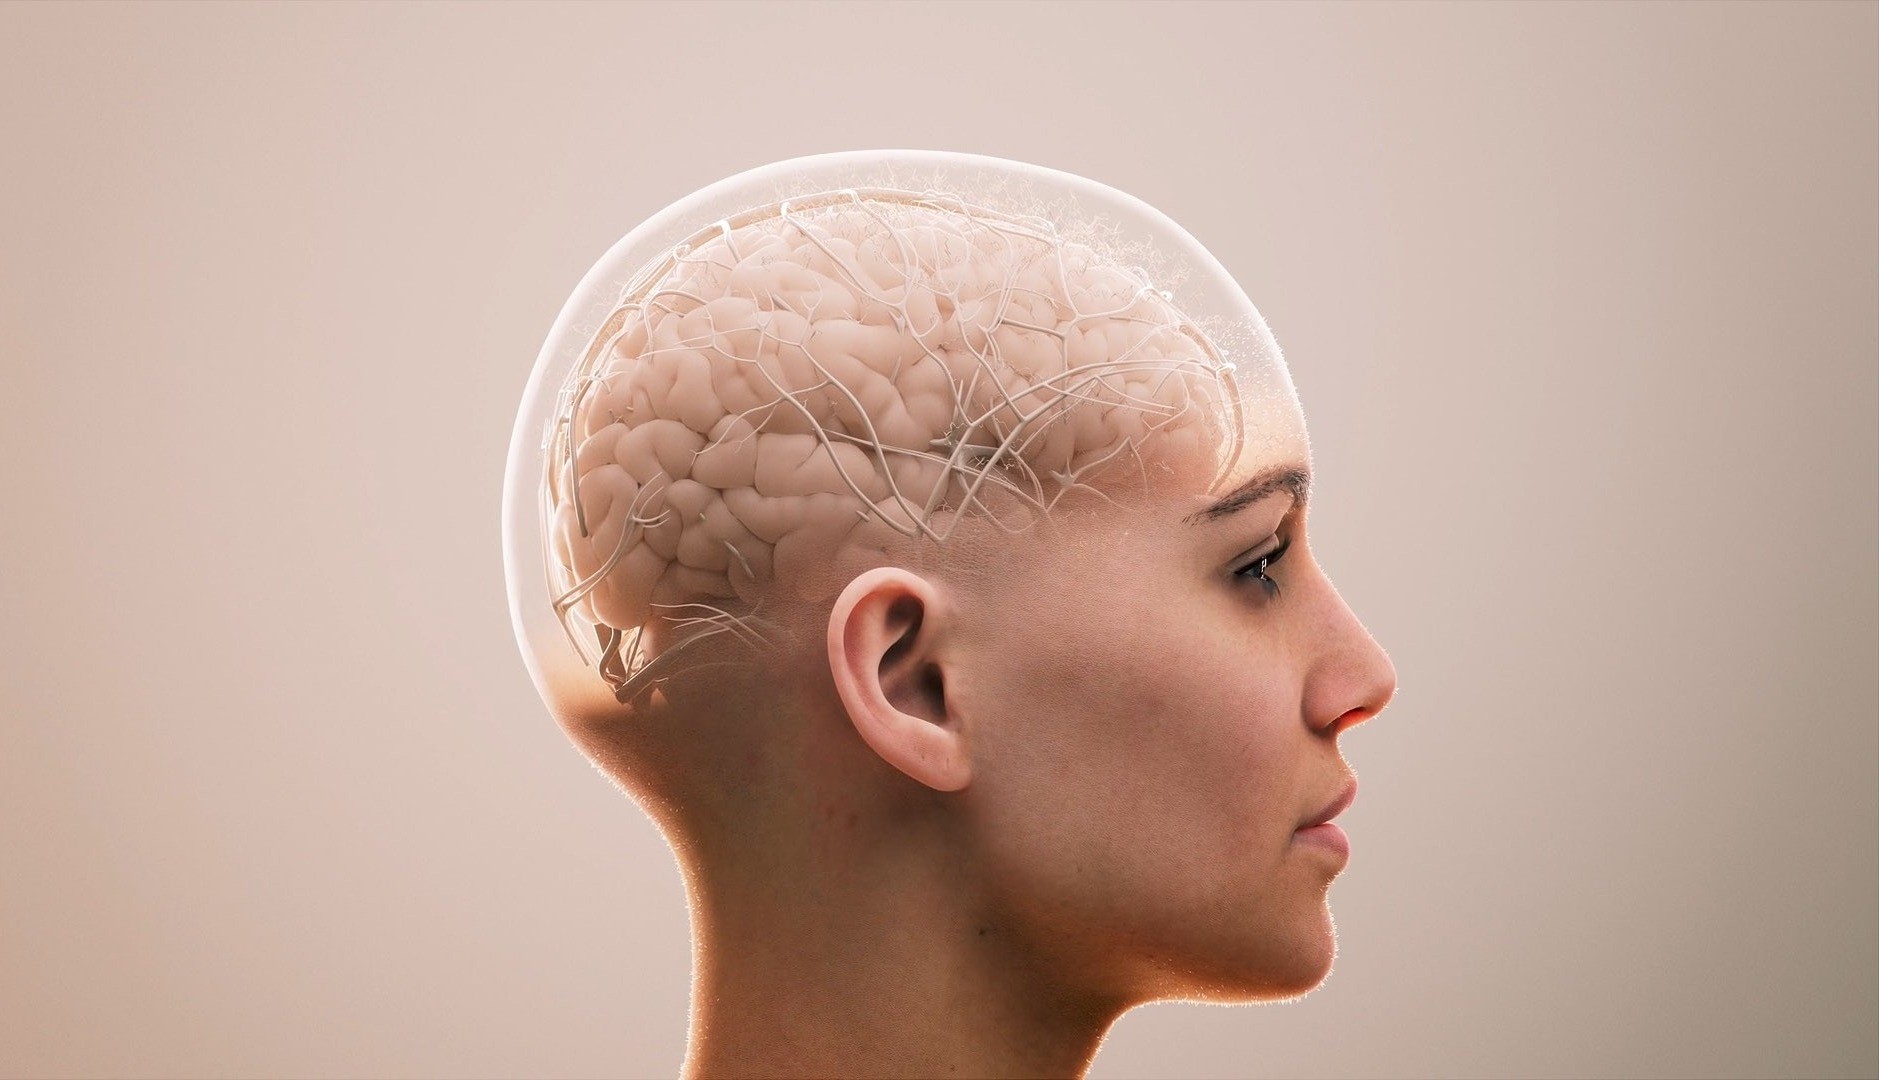 3D animation of sideview of head where brain network is visible.jpg